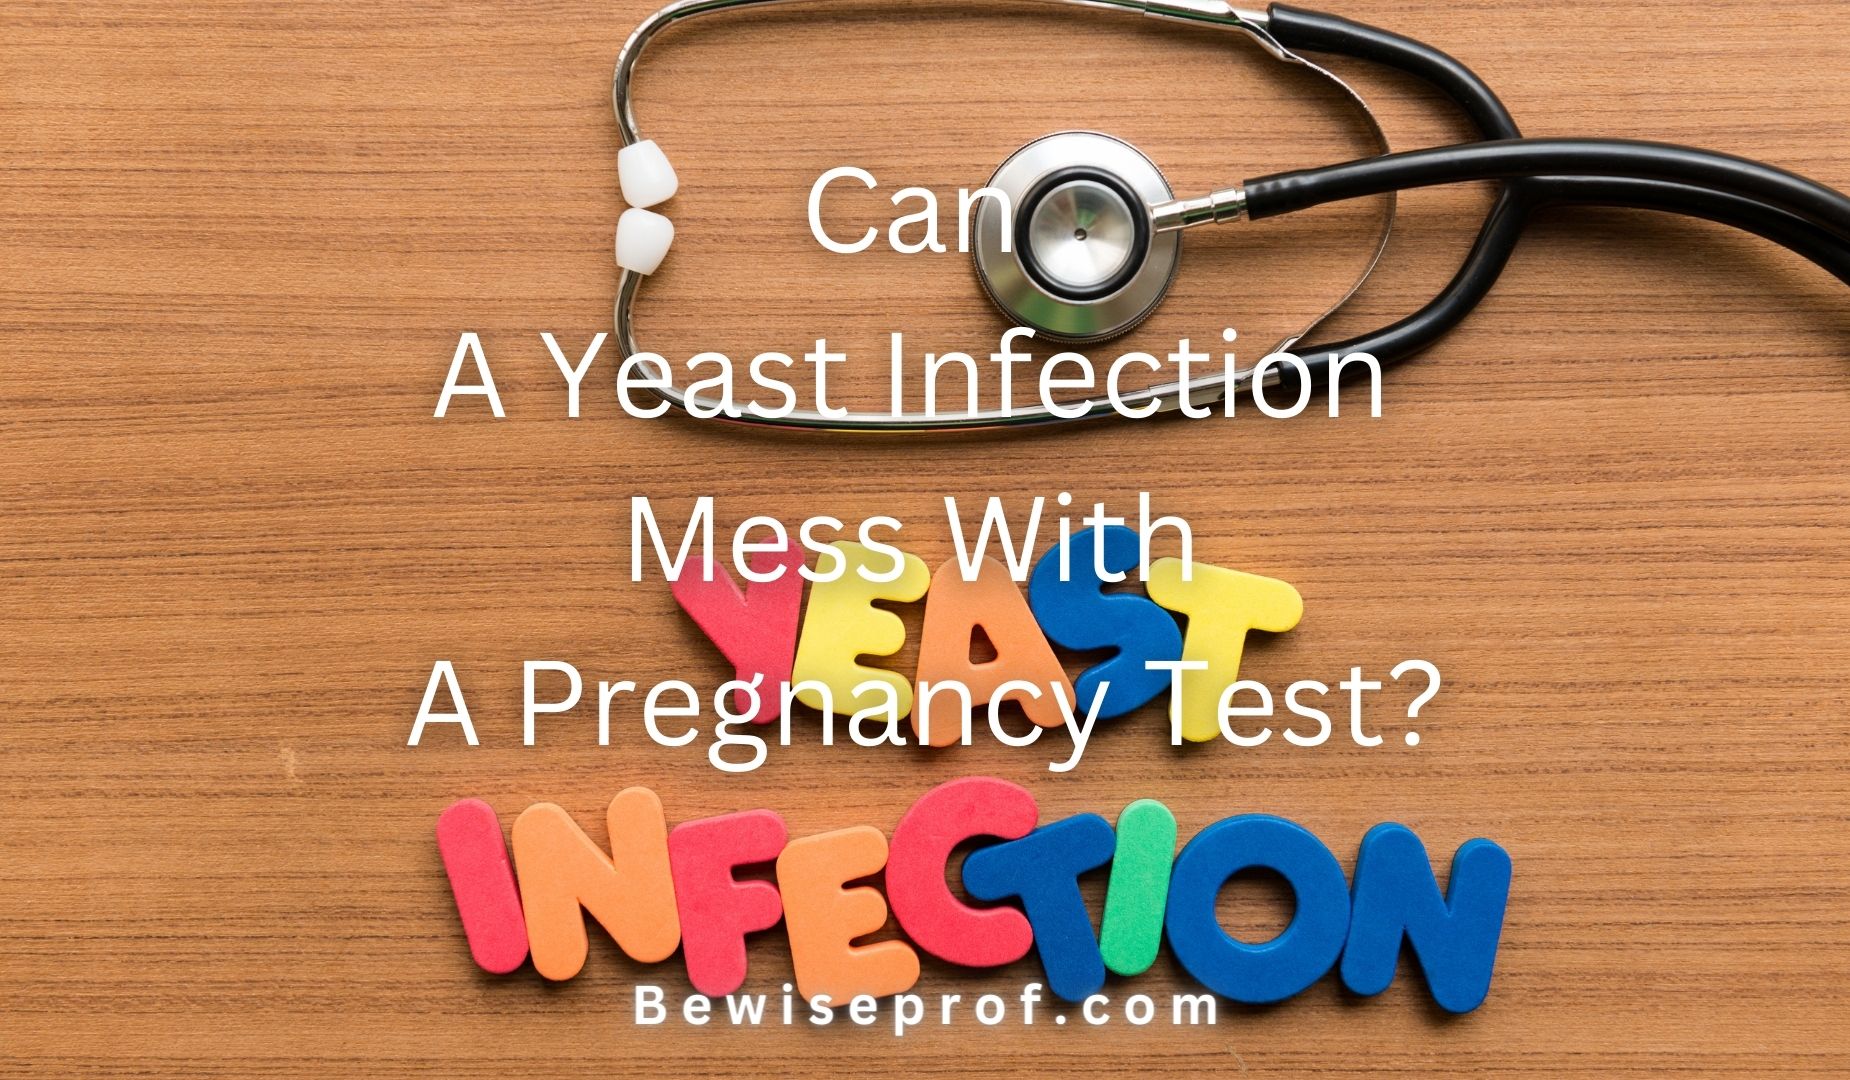 Can A Yeast Infection Mess With A Pregnancy Test?